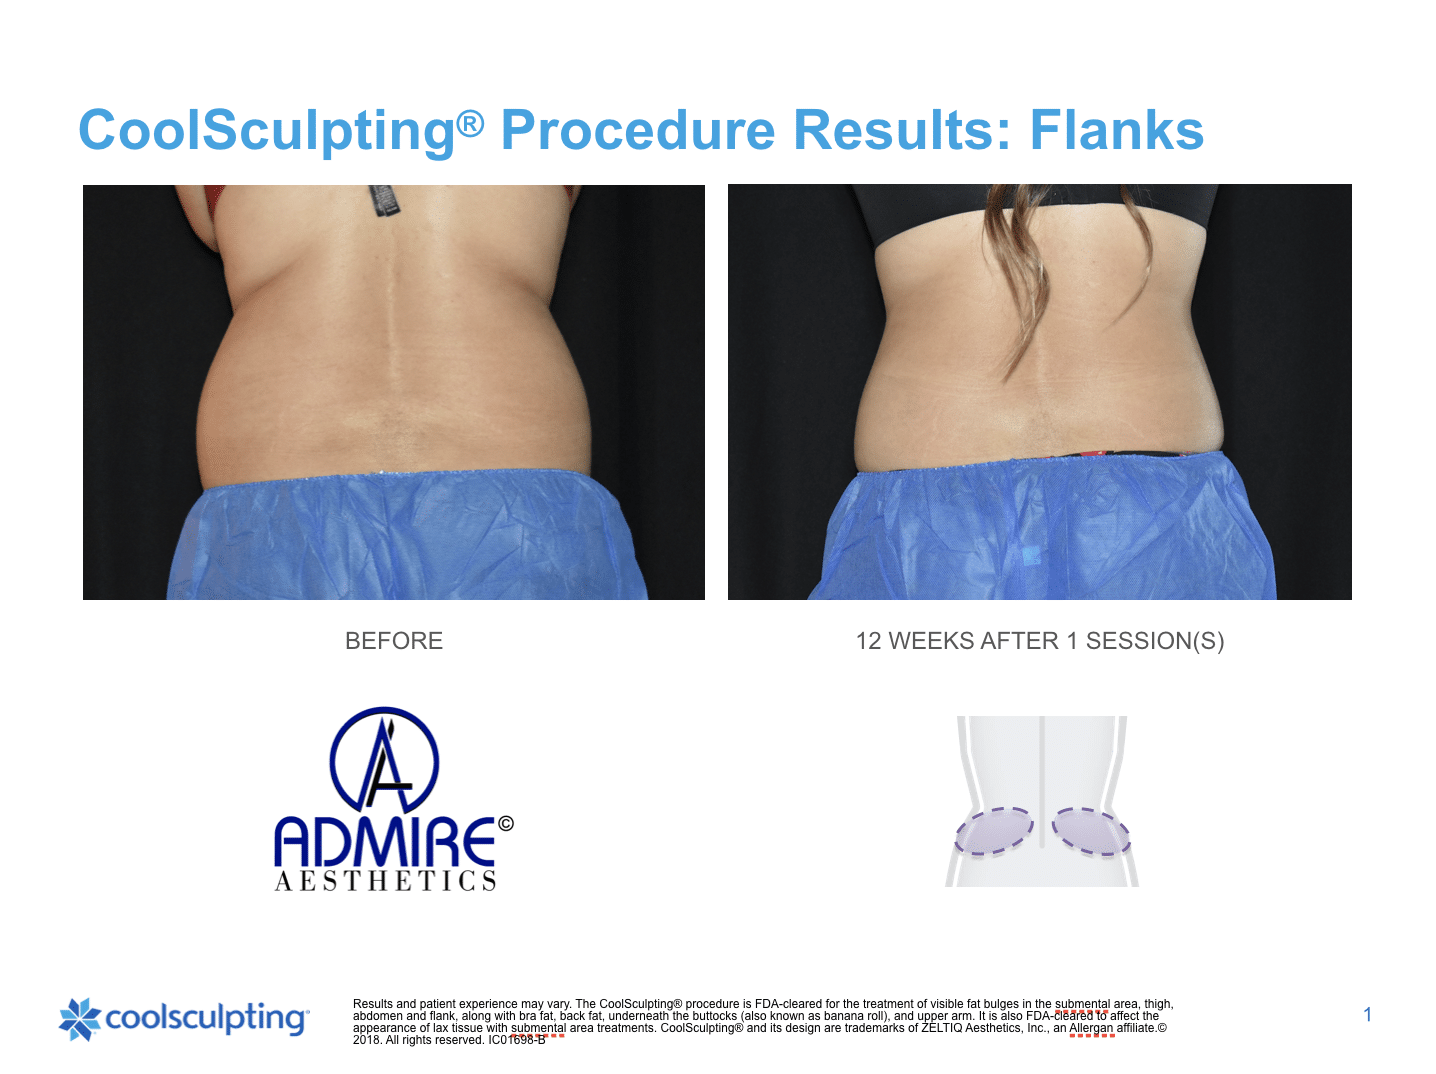 Womans back flanks before and after Coolsculpting treatment at Admire Aesthetics in Medford, OR.